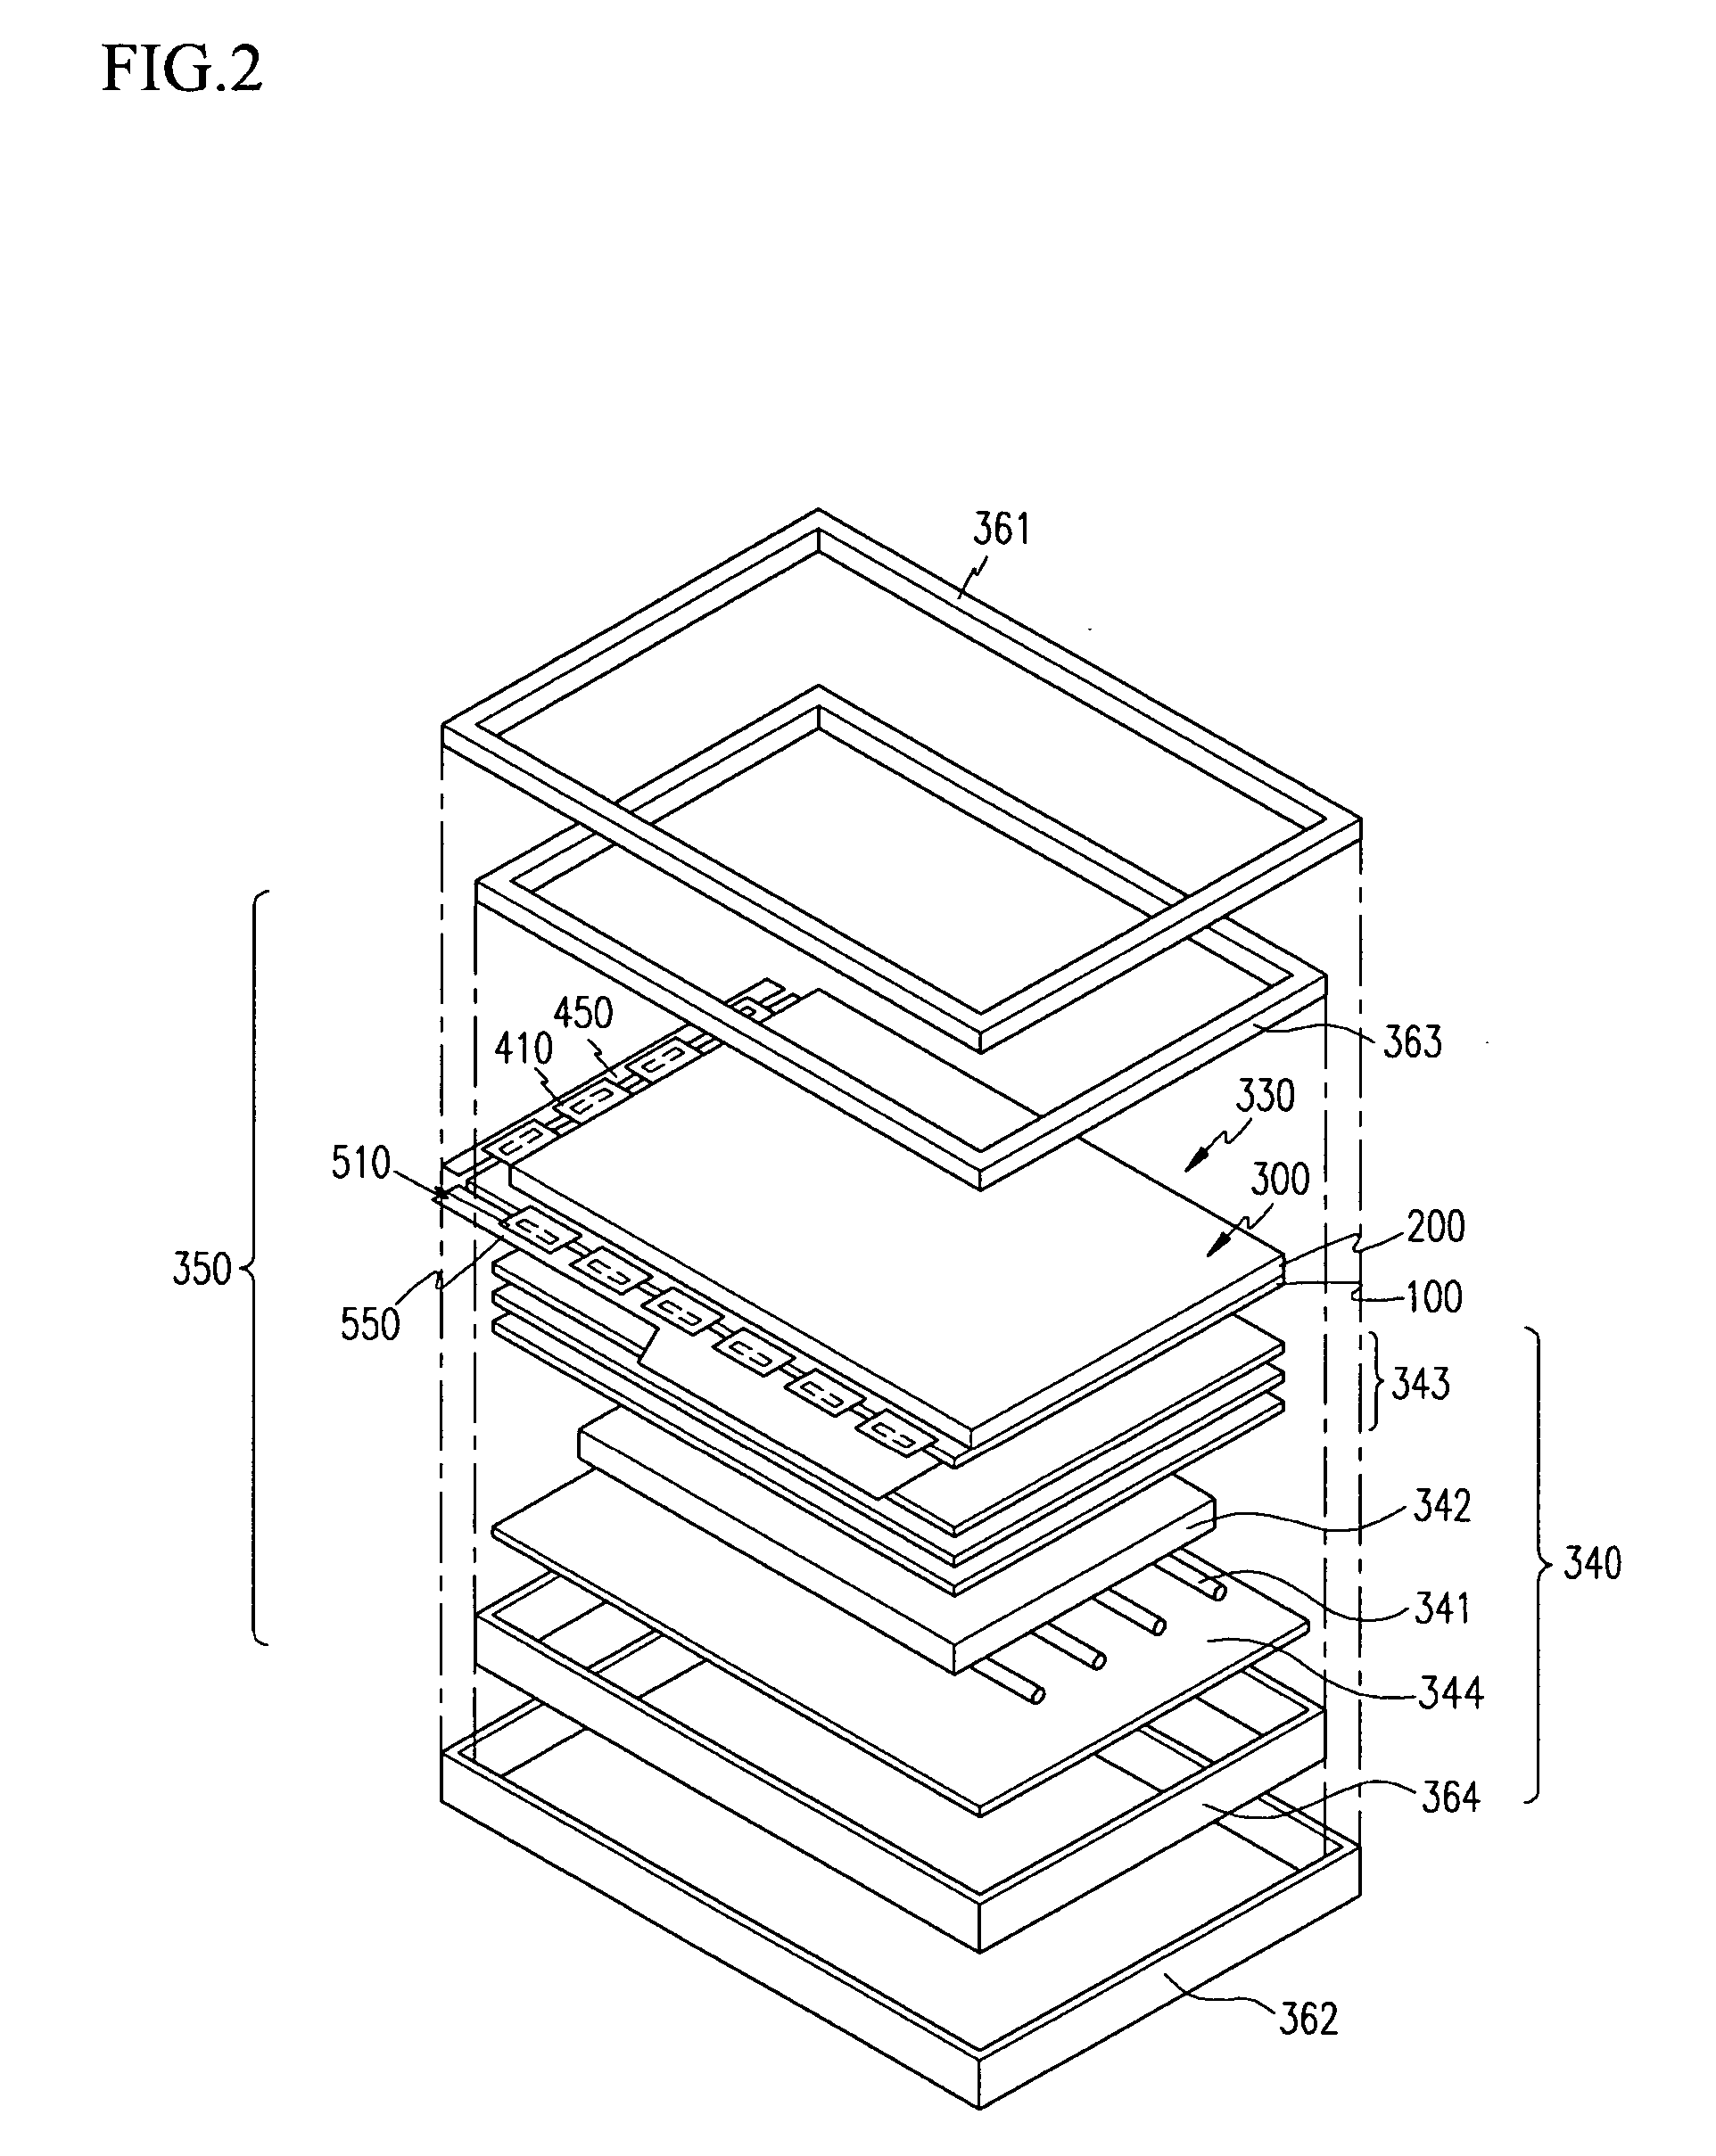 Driving device of light source for display device